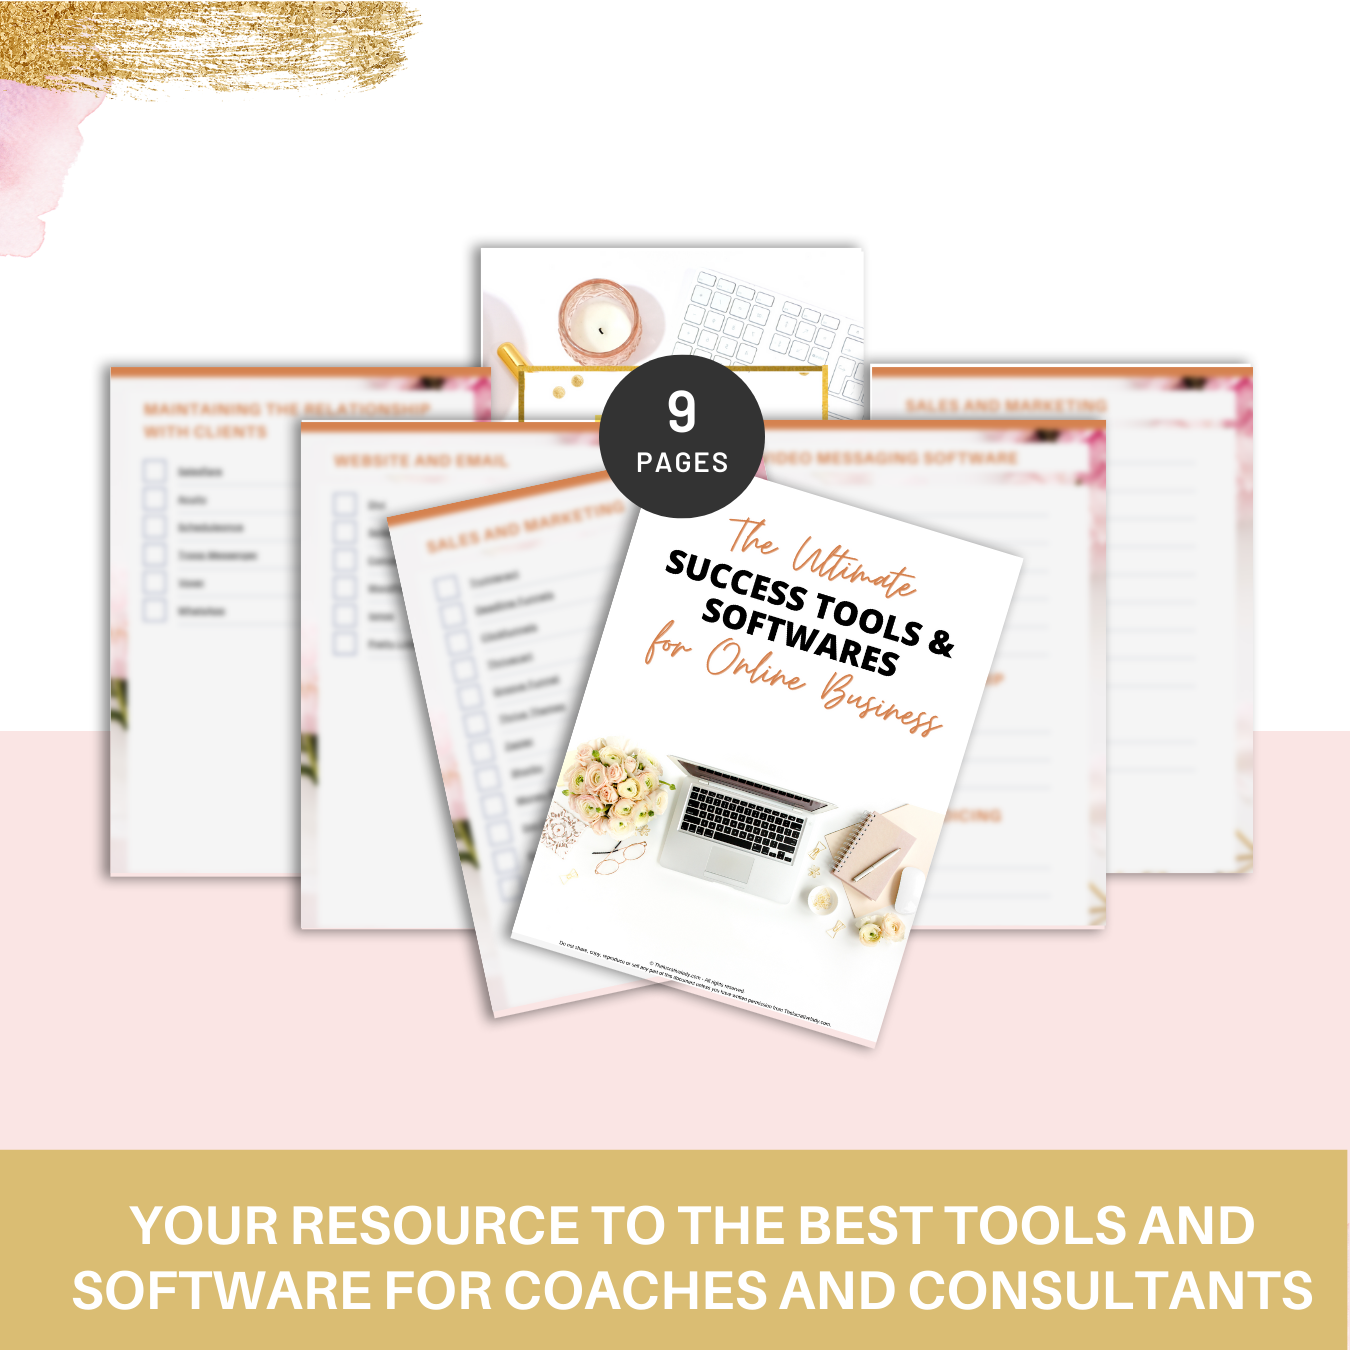 The Ultimate Success Tools & Softwares for Online Business